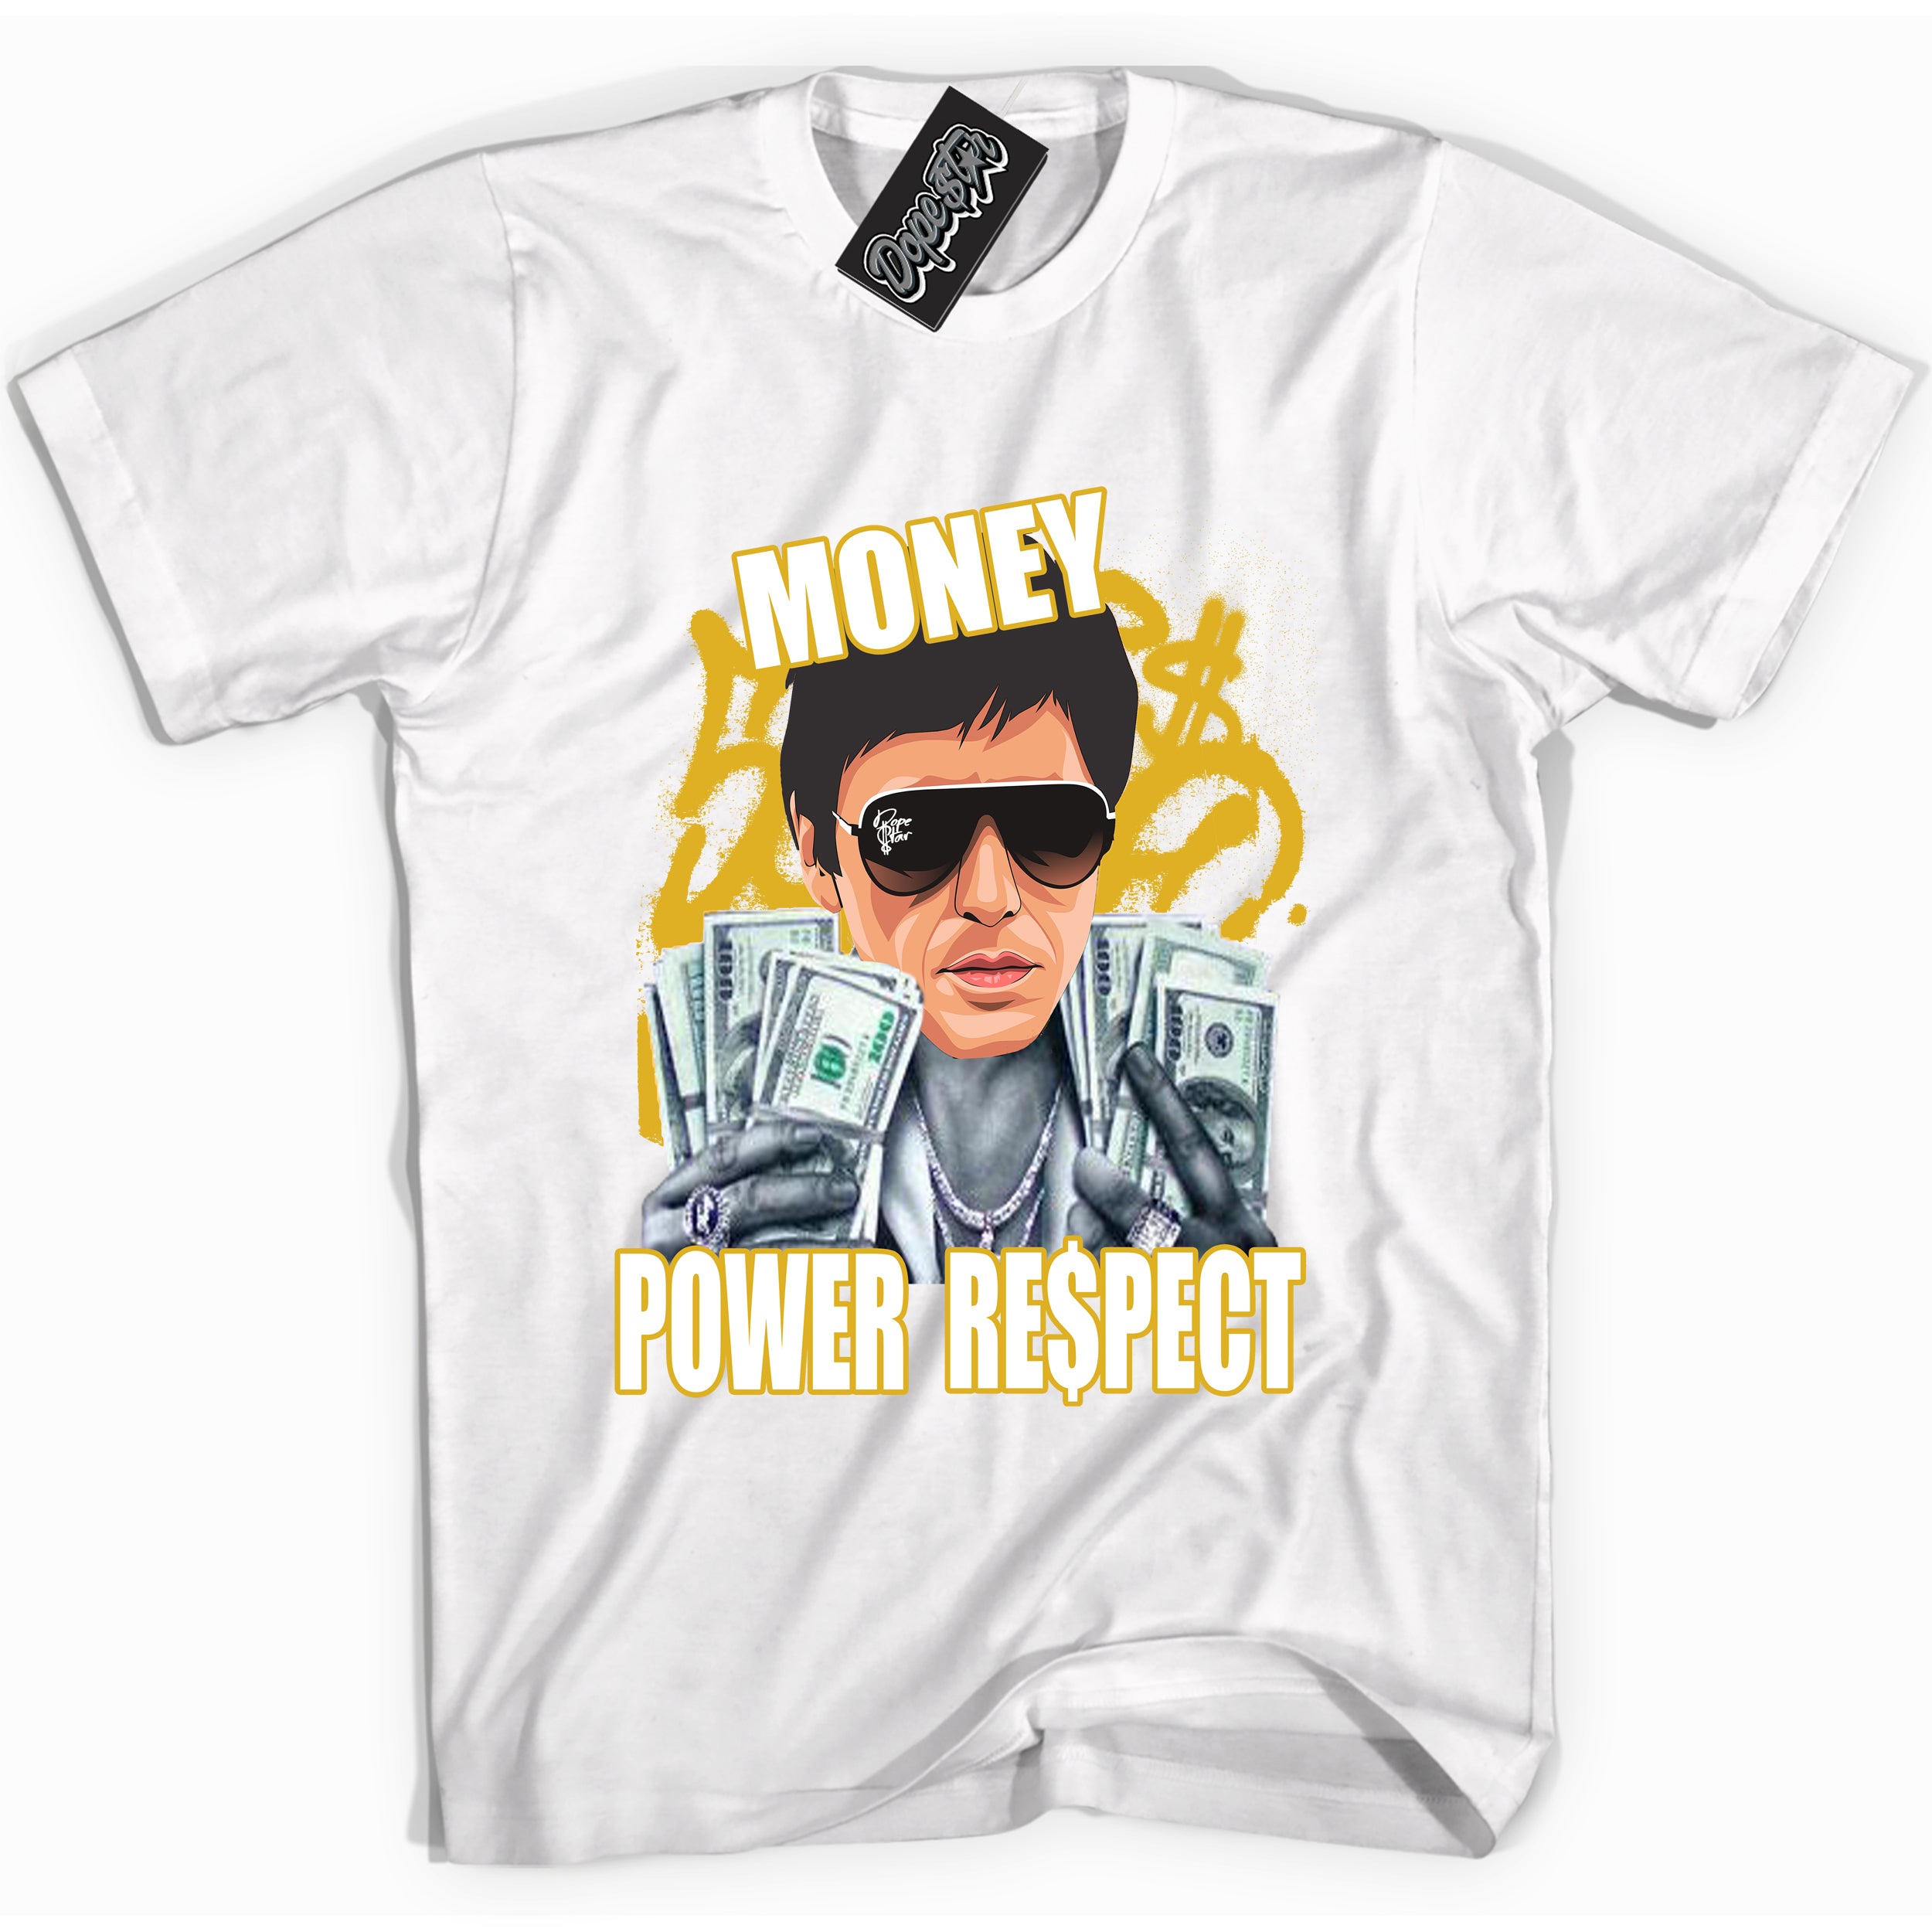 Cool White Shirt with “ Tony Montana” design that perfectly matches Yellow Ochre 6s Sneakers.